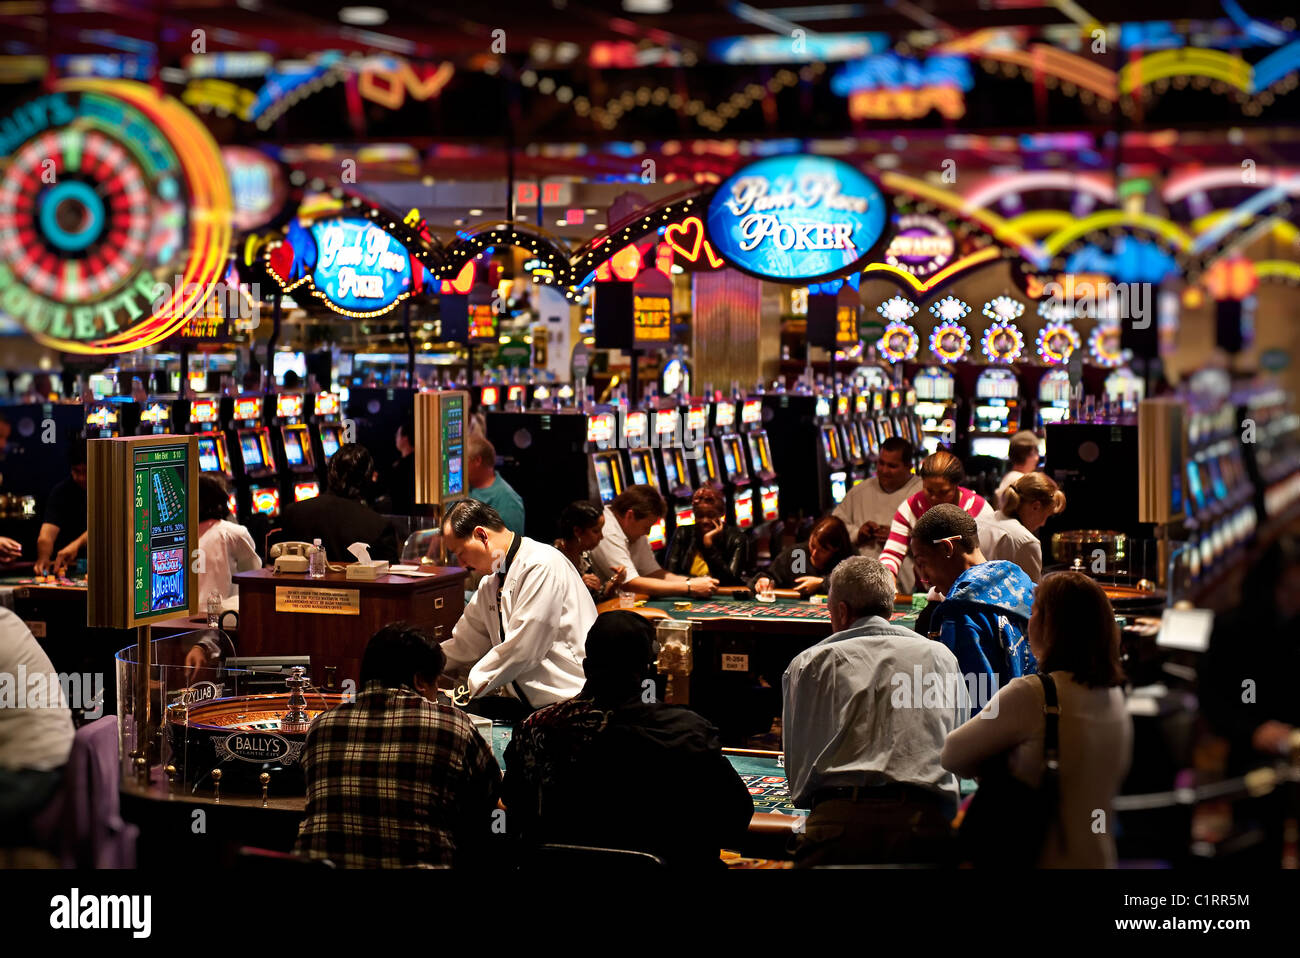 Casino roulette table and slot machines, Atlantic City, New Jersey Stock Photo